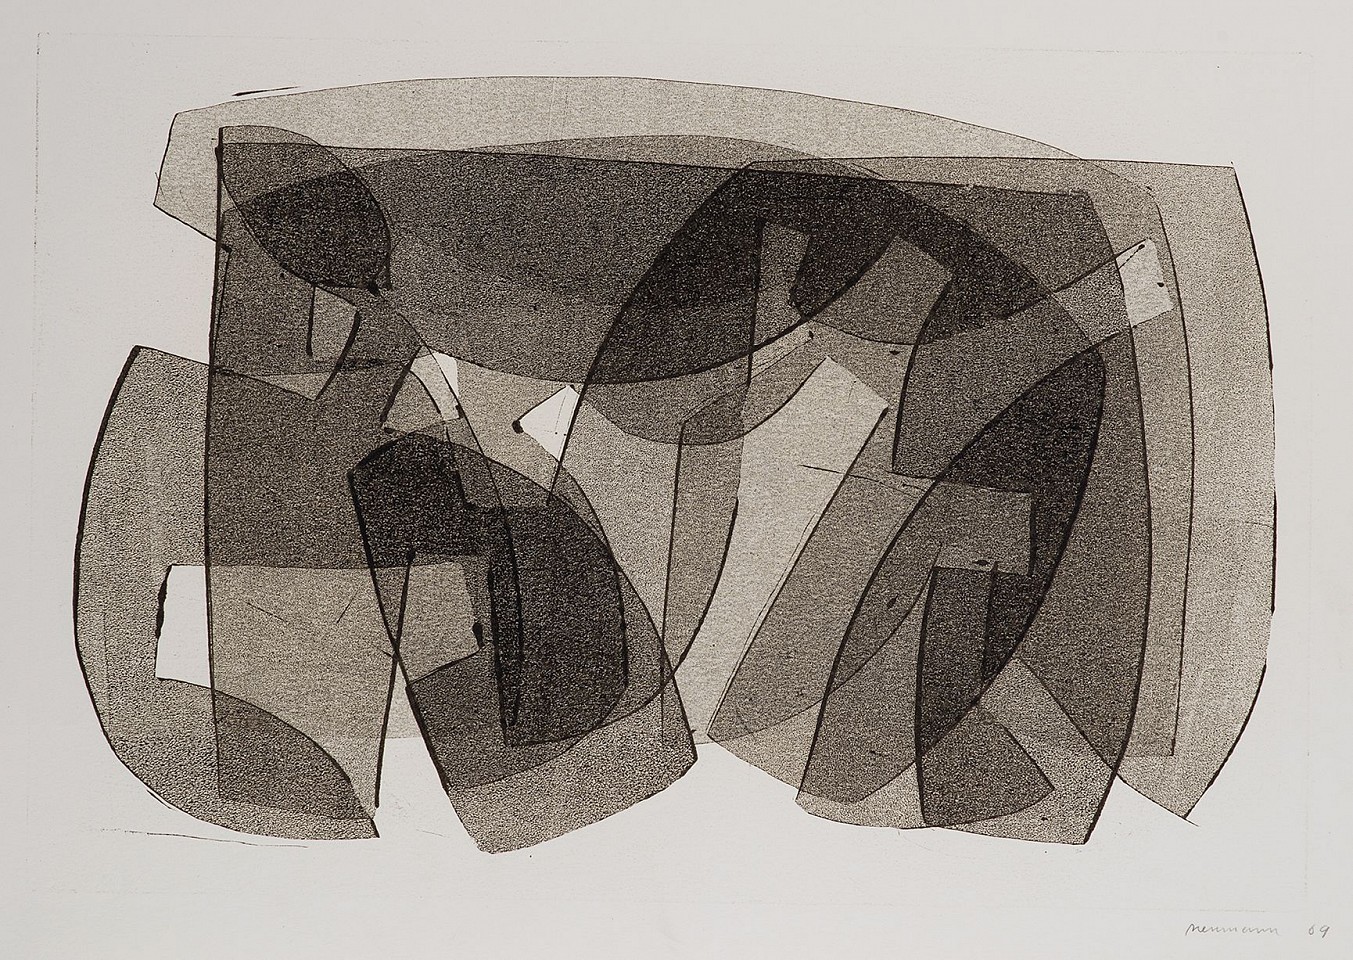 Otto Neumann 1895-1975, Abstract Composition/ Black & Gray, 1969
monotype on paper /Black & Gray, 24.5"x 17.5", 26" x 33" framed
OT 089048
$8,400